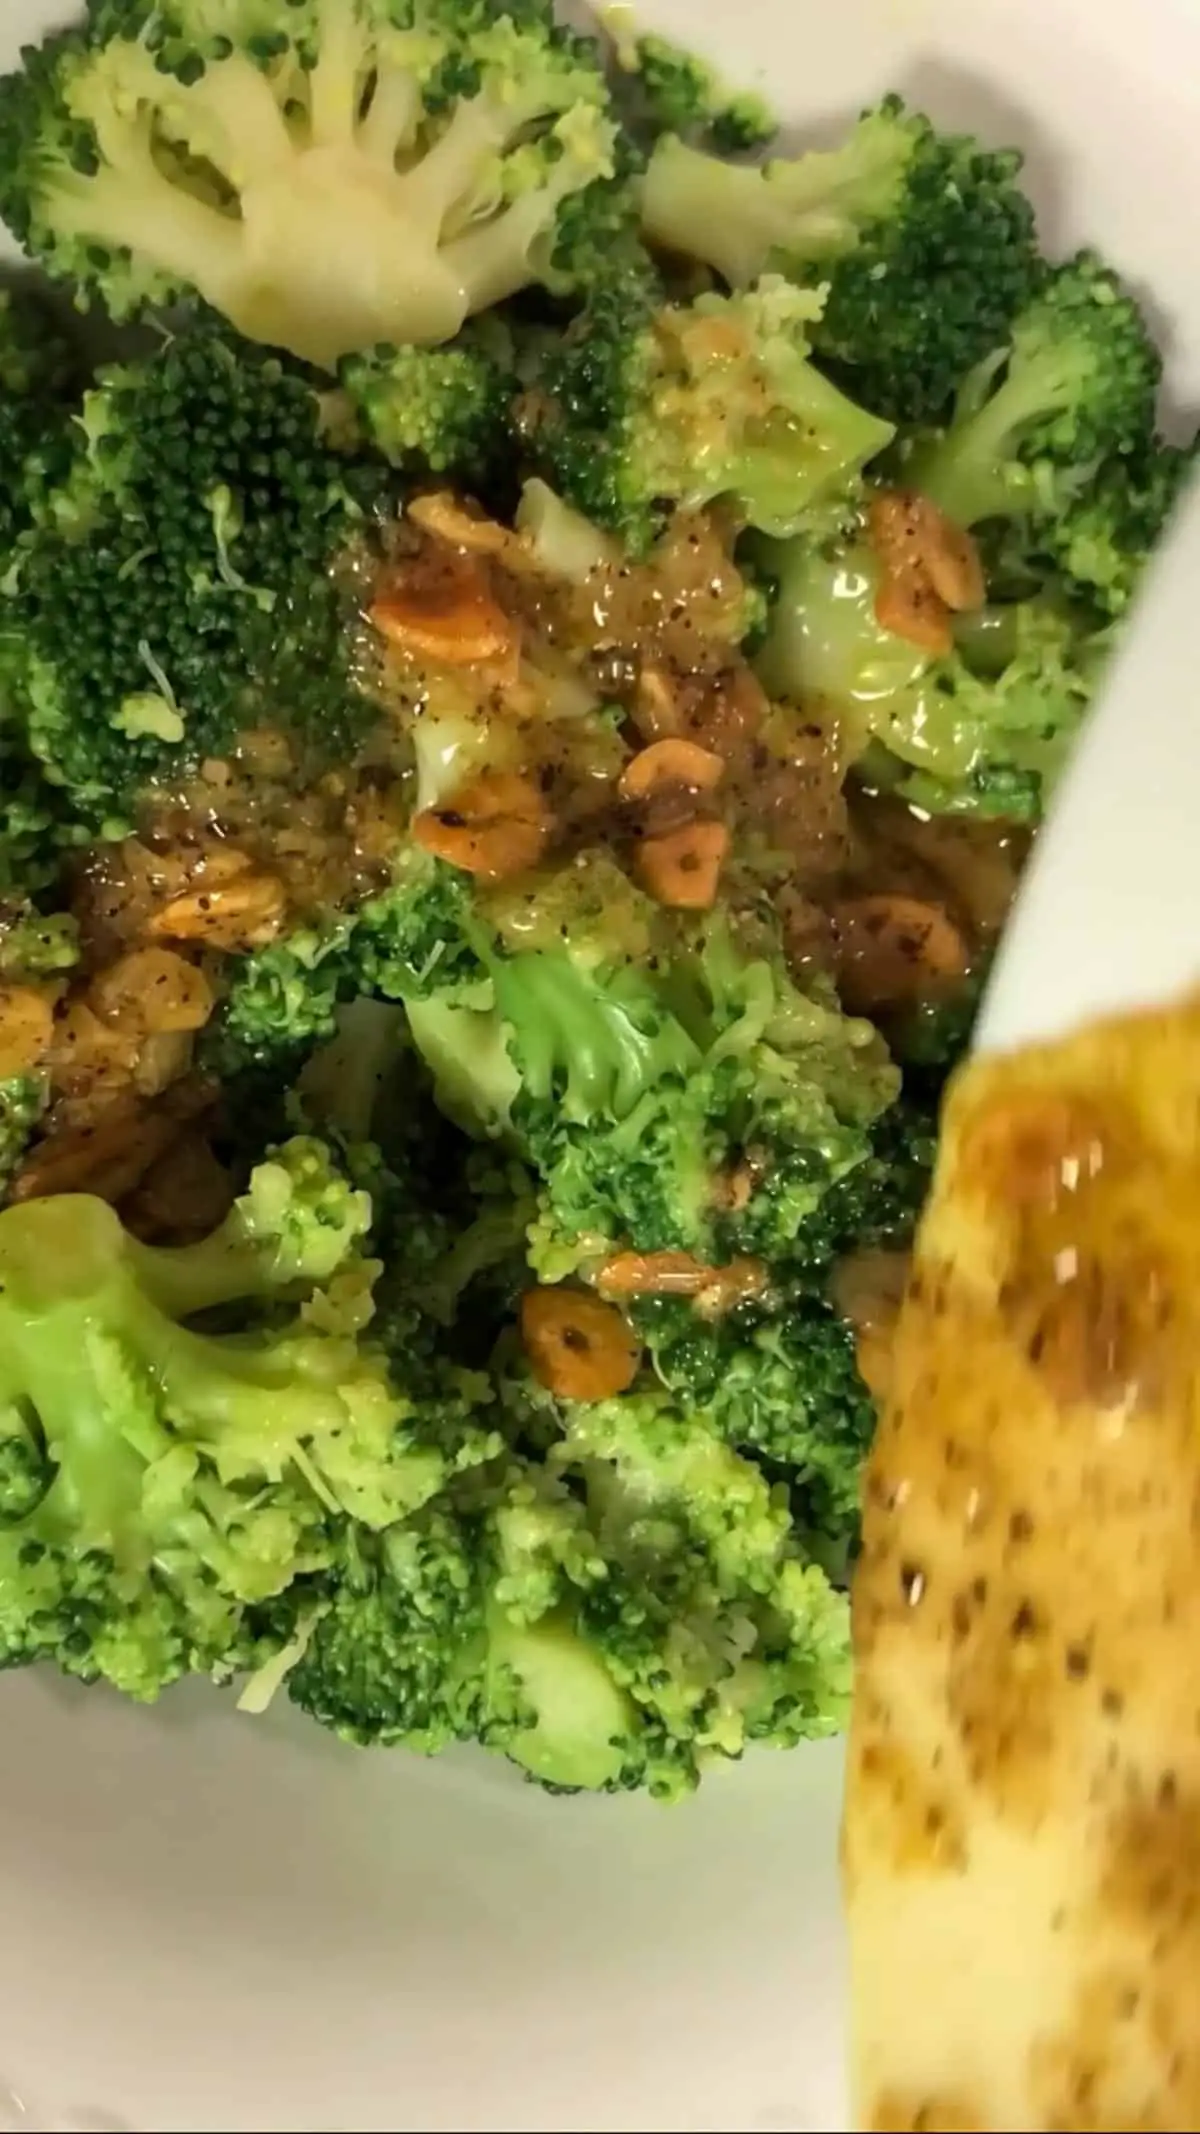 Broccoli florets in a white bowl with slivers of toasted garlic and a lemony sauce in a white bowl being drizzled on top of the garlic.